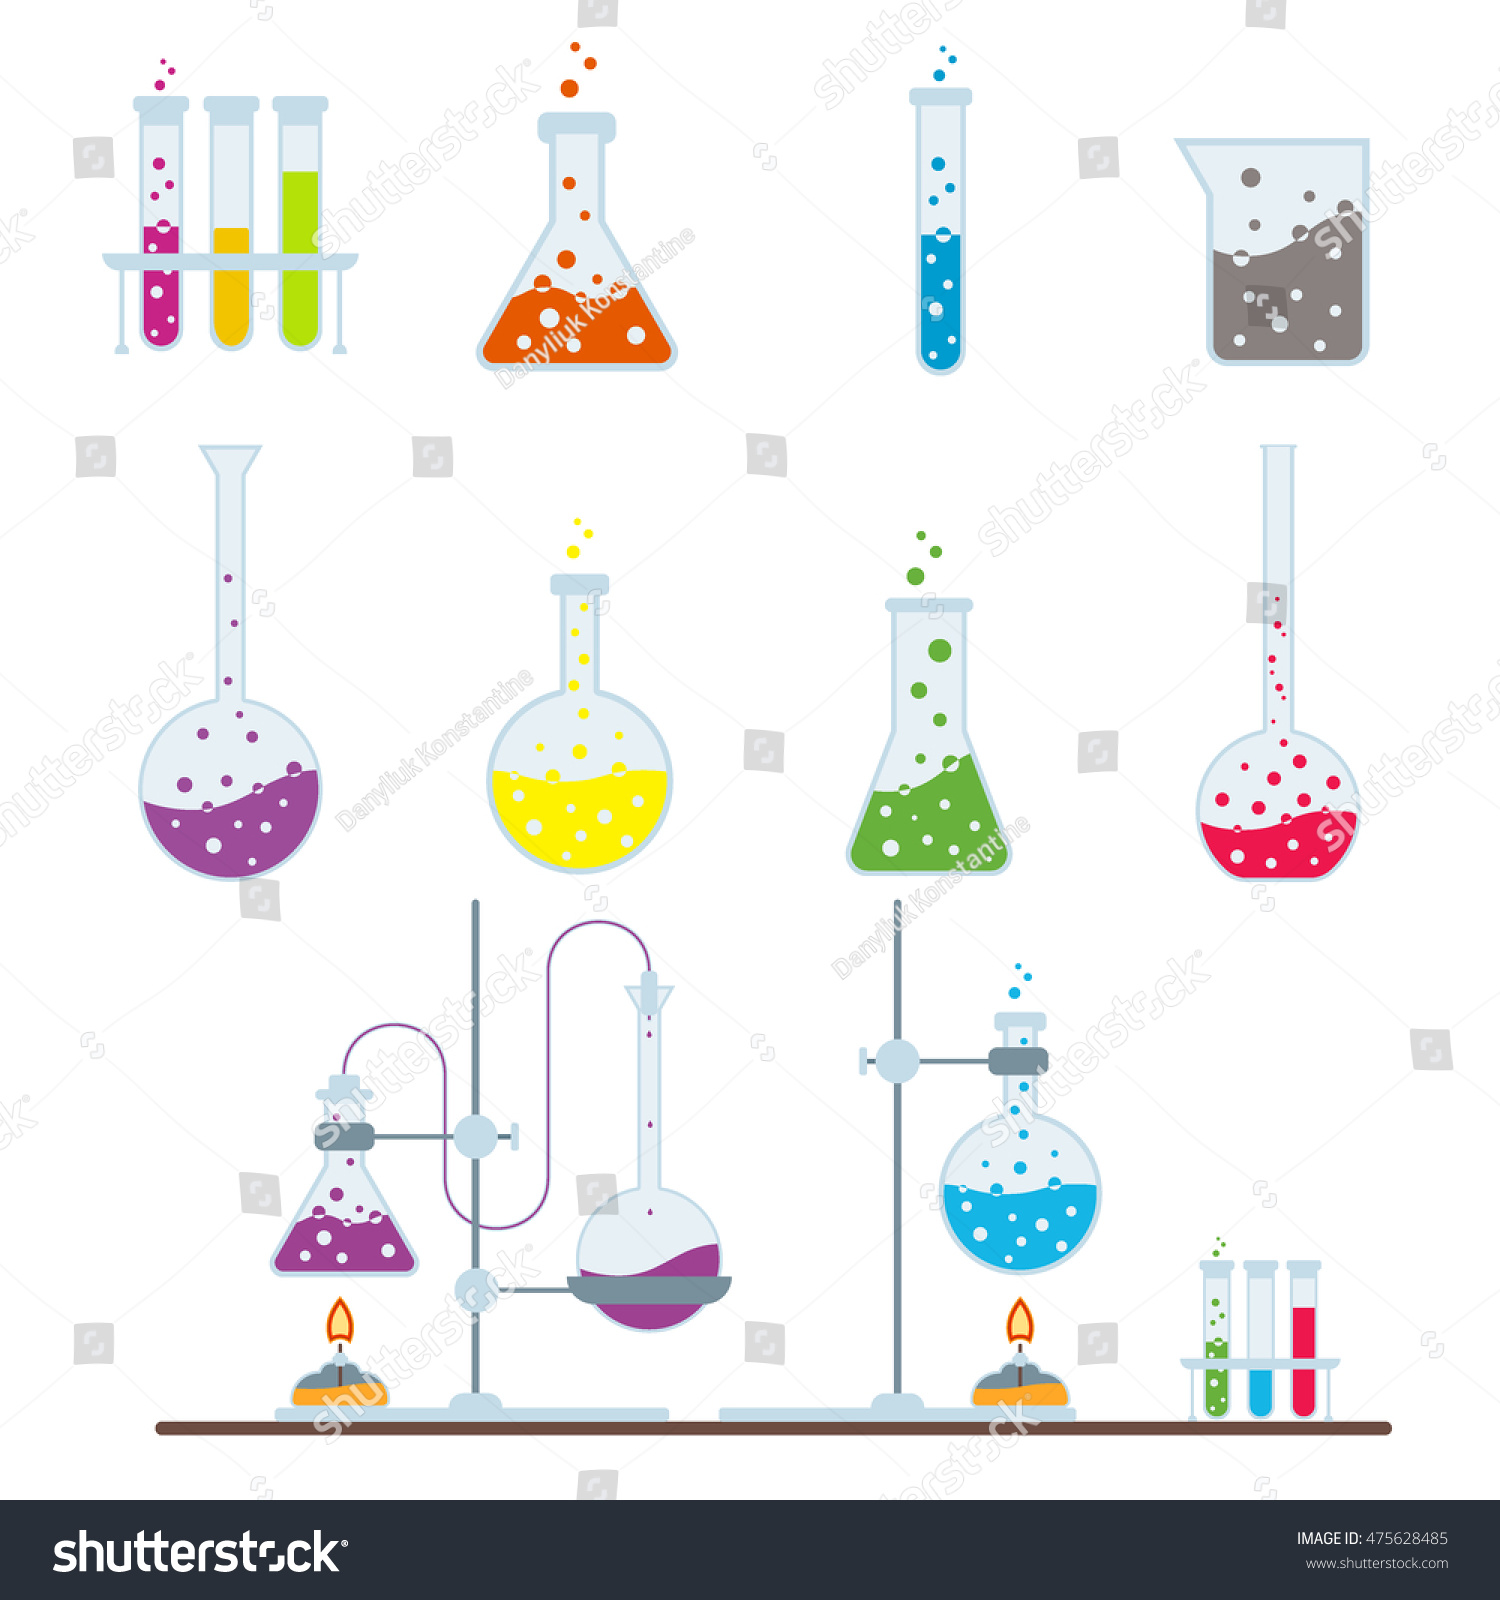 Chemistry Experiment Research Test Science Glass Stock Photo (Photo ...